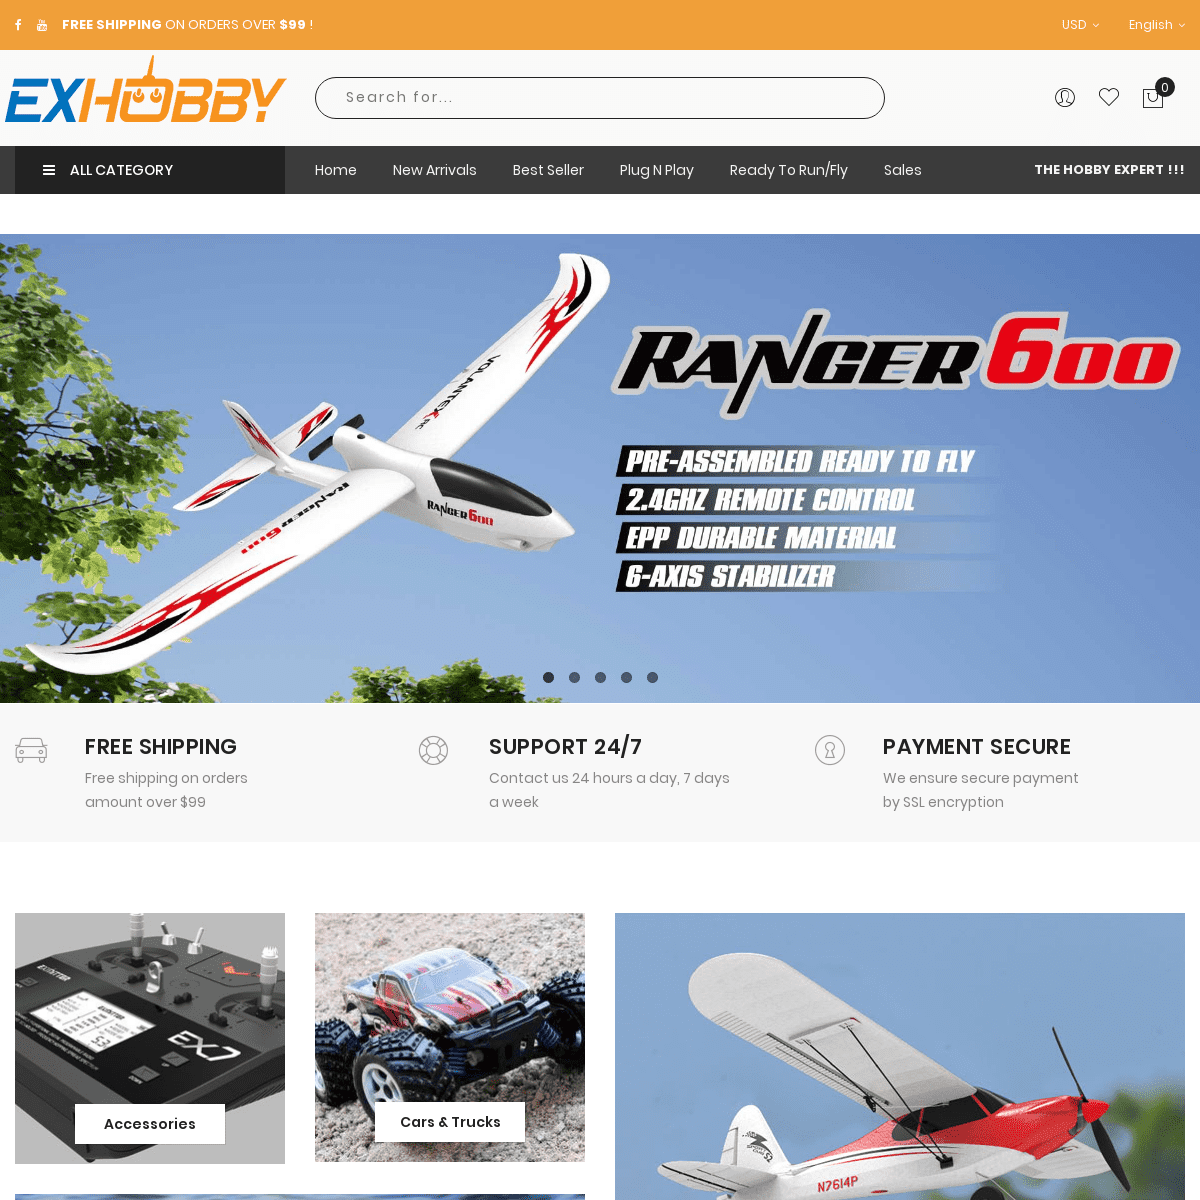 RC Airplanes, Boats, Cars, Trucks, Drones, Radios, Electronics, Batteries, Chargers, ESC, Motor  | EXHOBBY